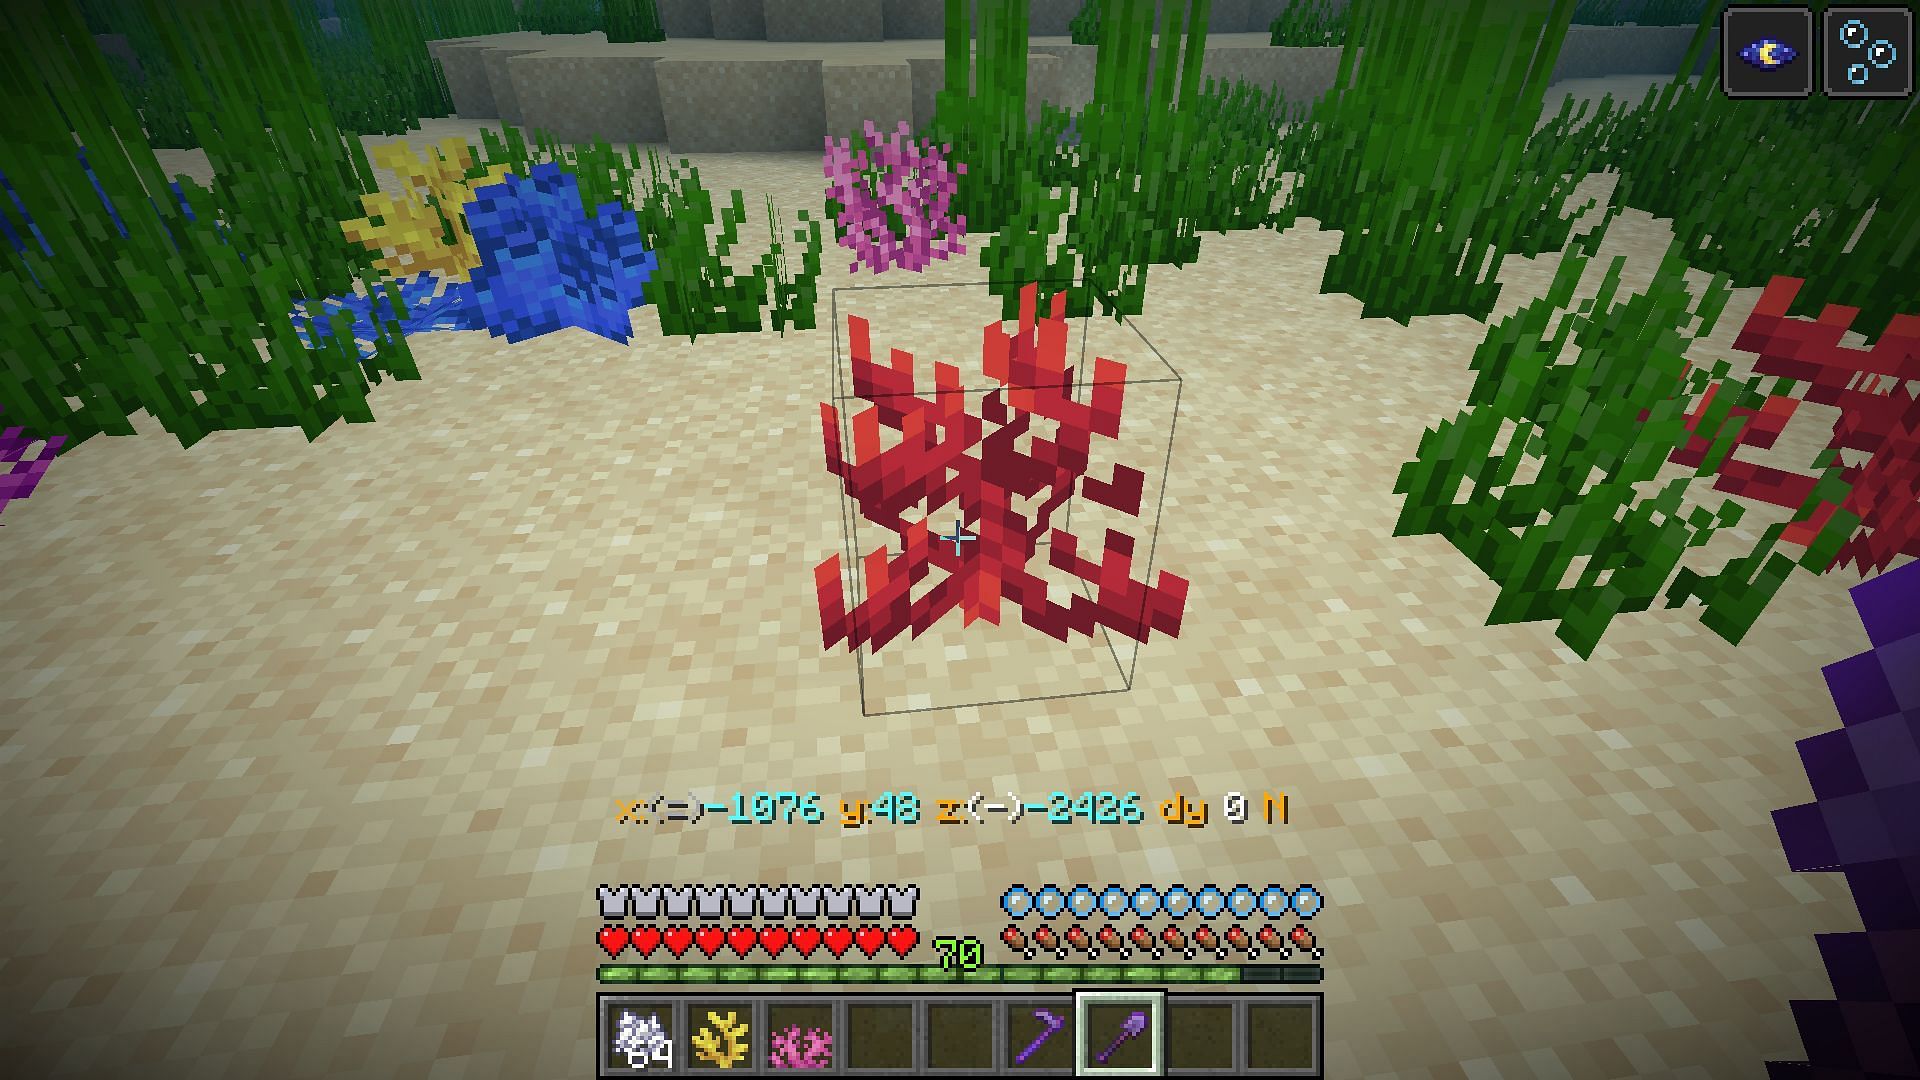 Corals can only be obtained when mined with a silk touch enchanted tool in Minecraft (Image via Mojang)